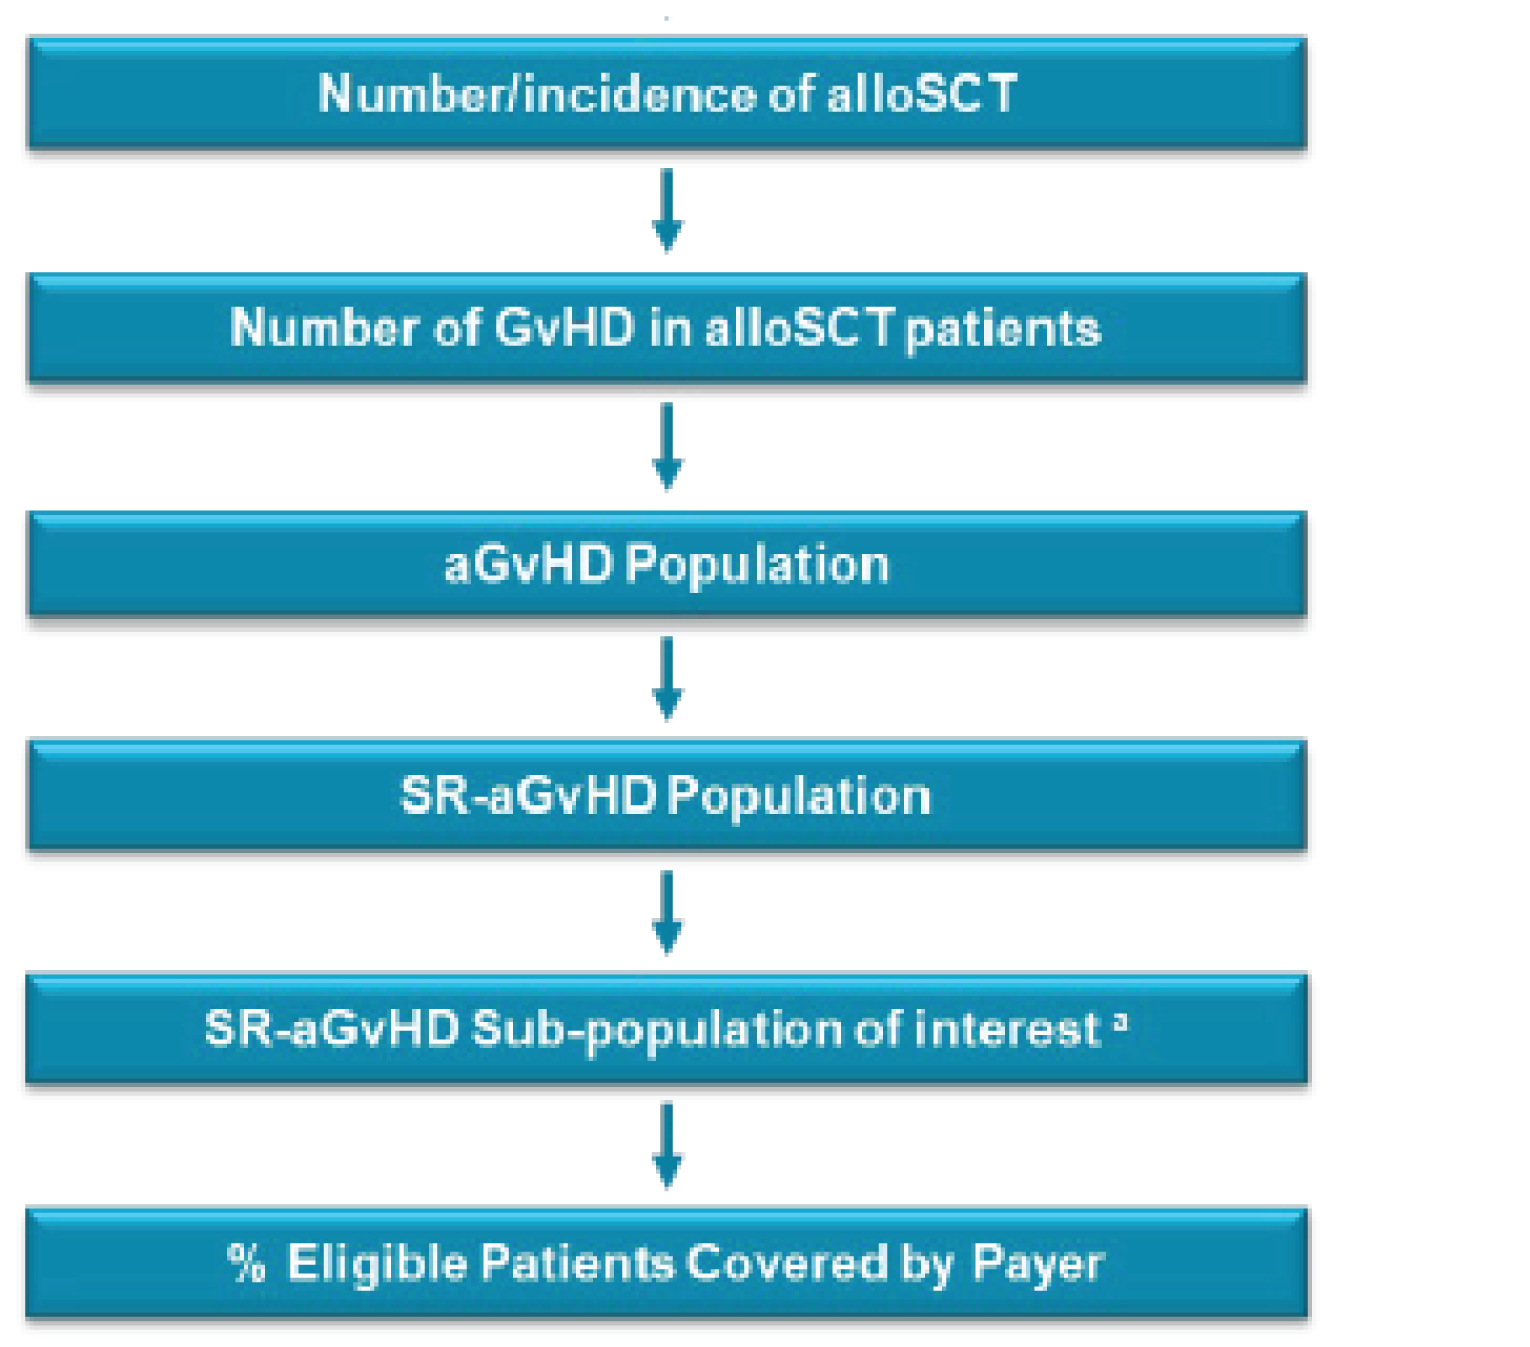 Flow chart indicating the stepwise approach to calculating the total number of patients eligible for treatment in Canada. Starting with the number/incidence of alloSCT, followed by the number of GvHD in alloSCT patients, aGvHD population, SR-aGvHD population, SR-aGvHD sub-population of interest, and the percentage covered by a payer.